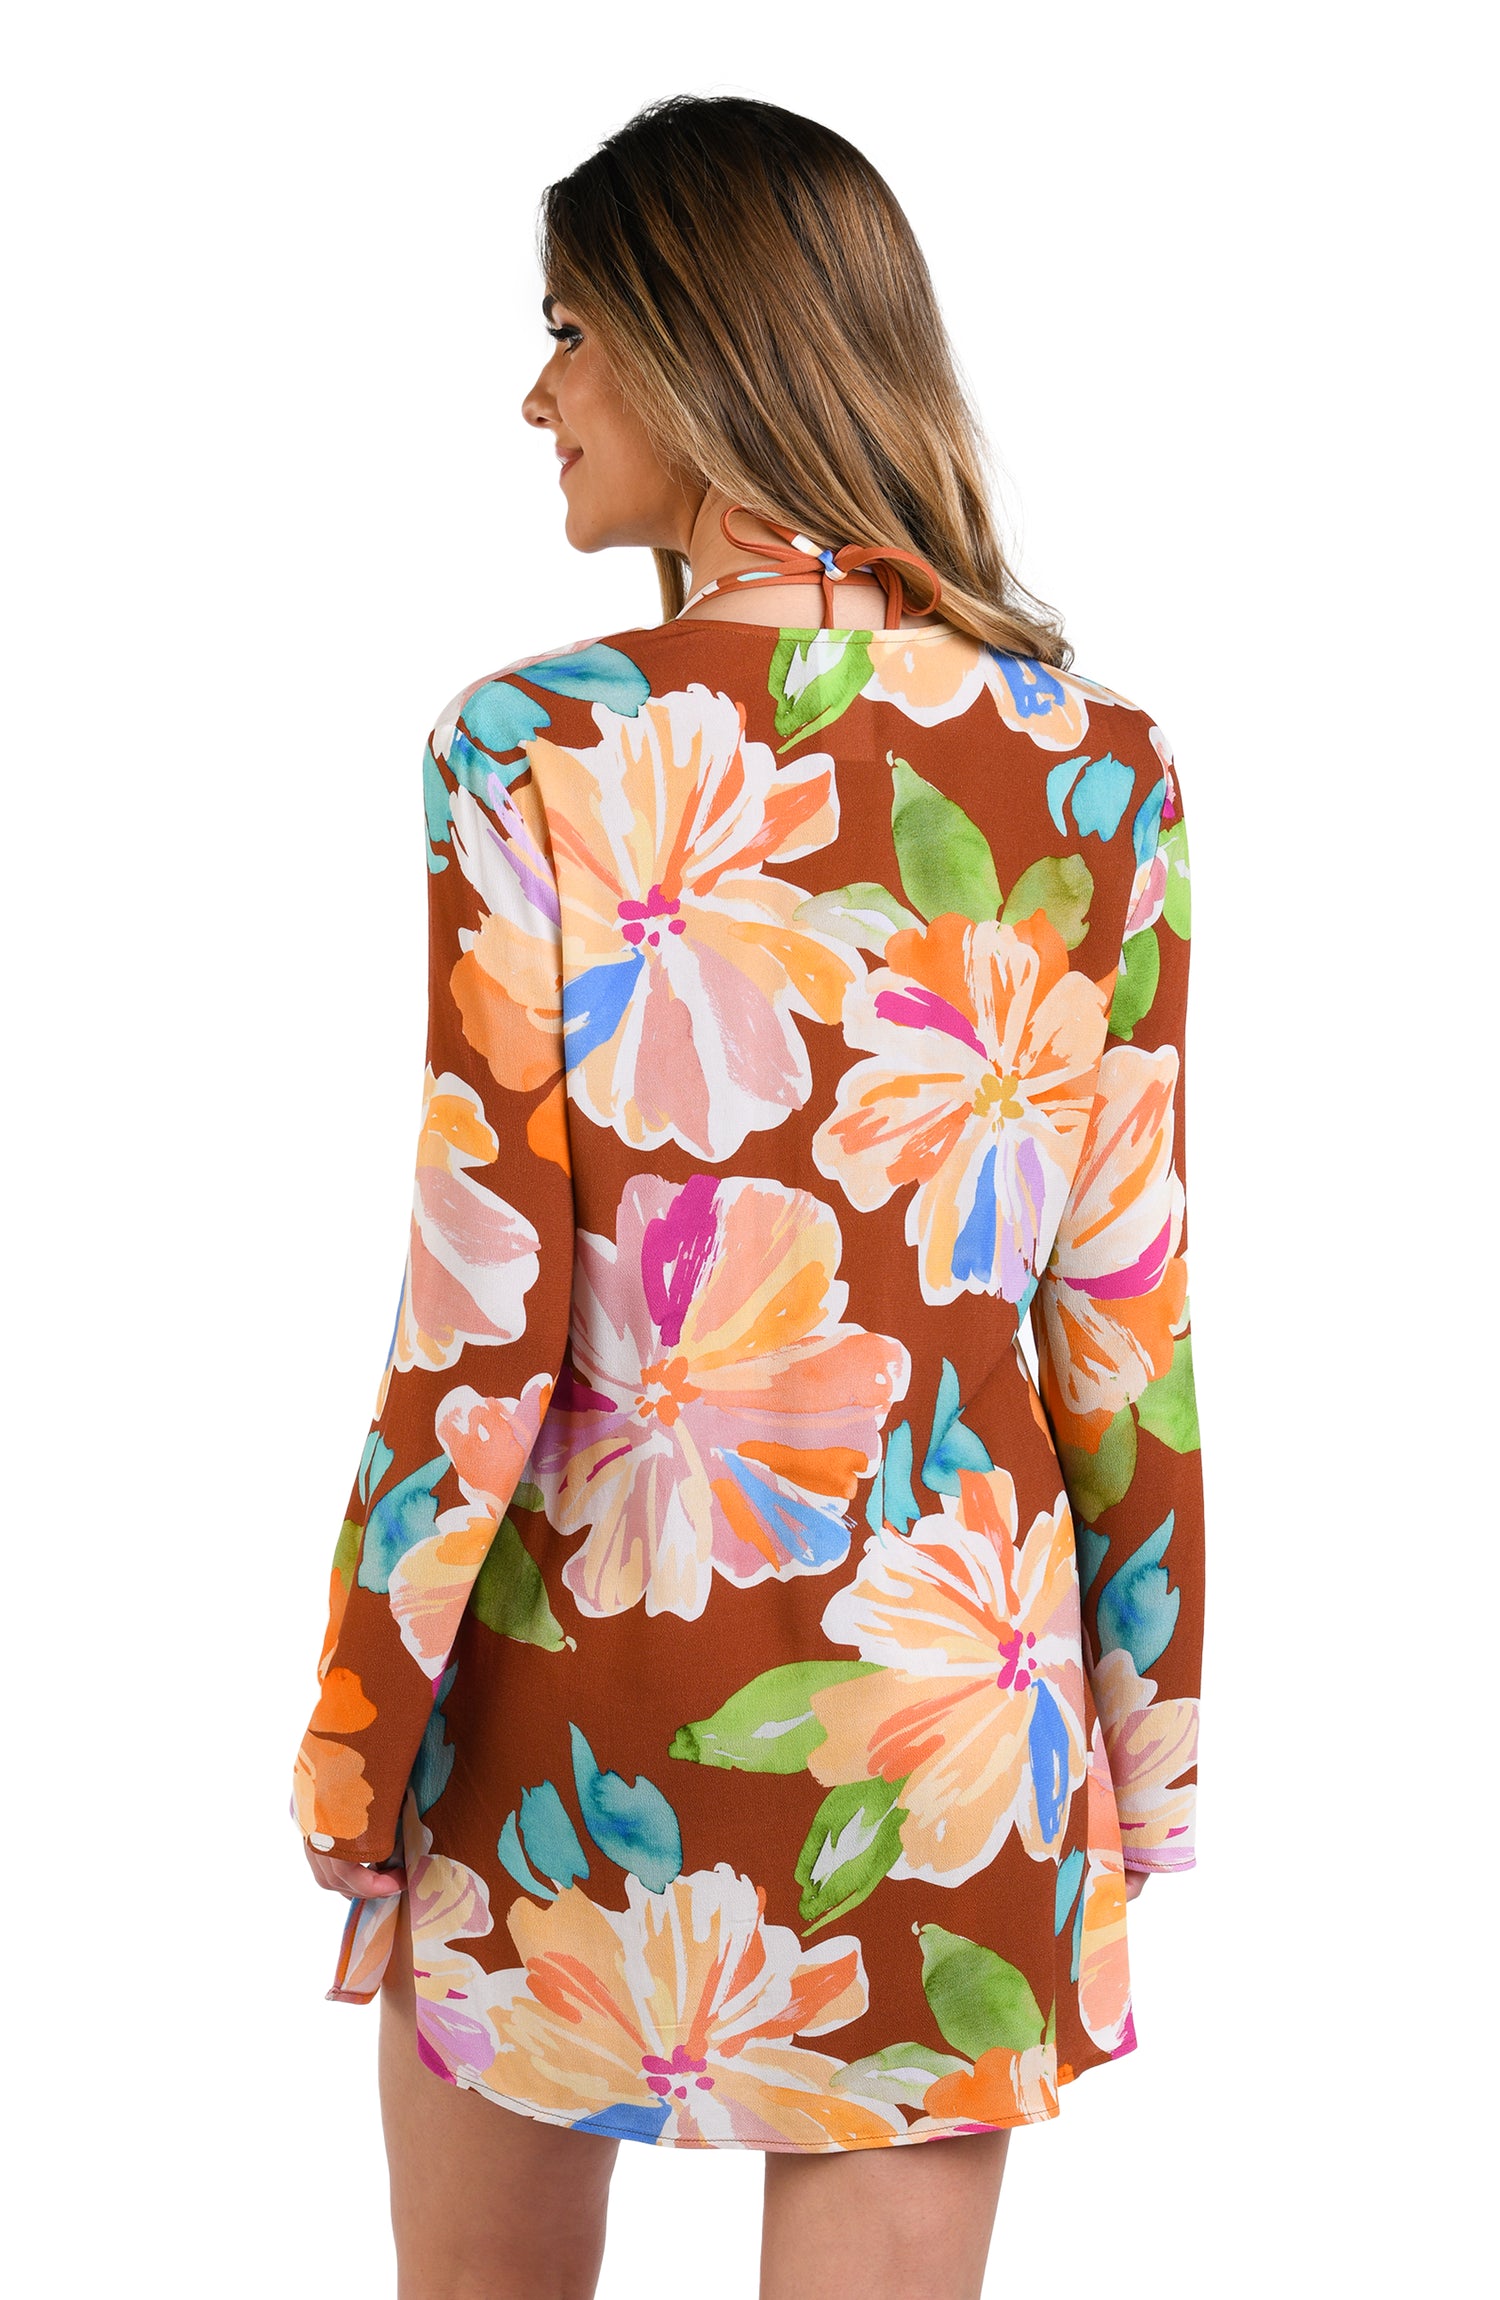 Model is wearing floral patterned tunic cover up with bold strokes of peach, pink, orange, and blue hues on a rich brown background.